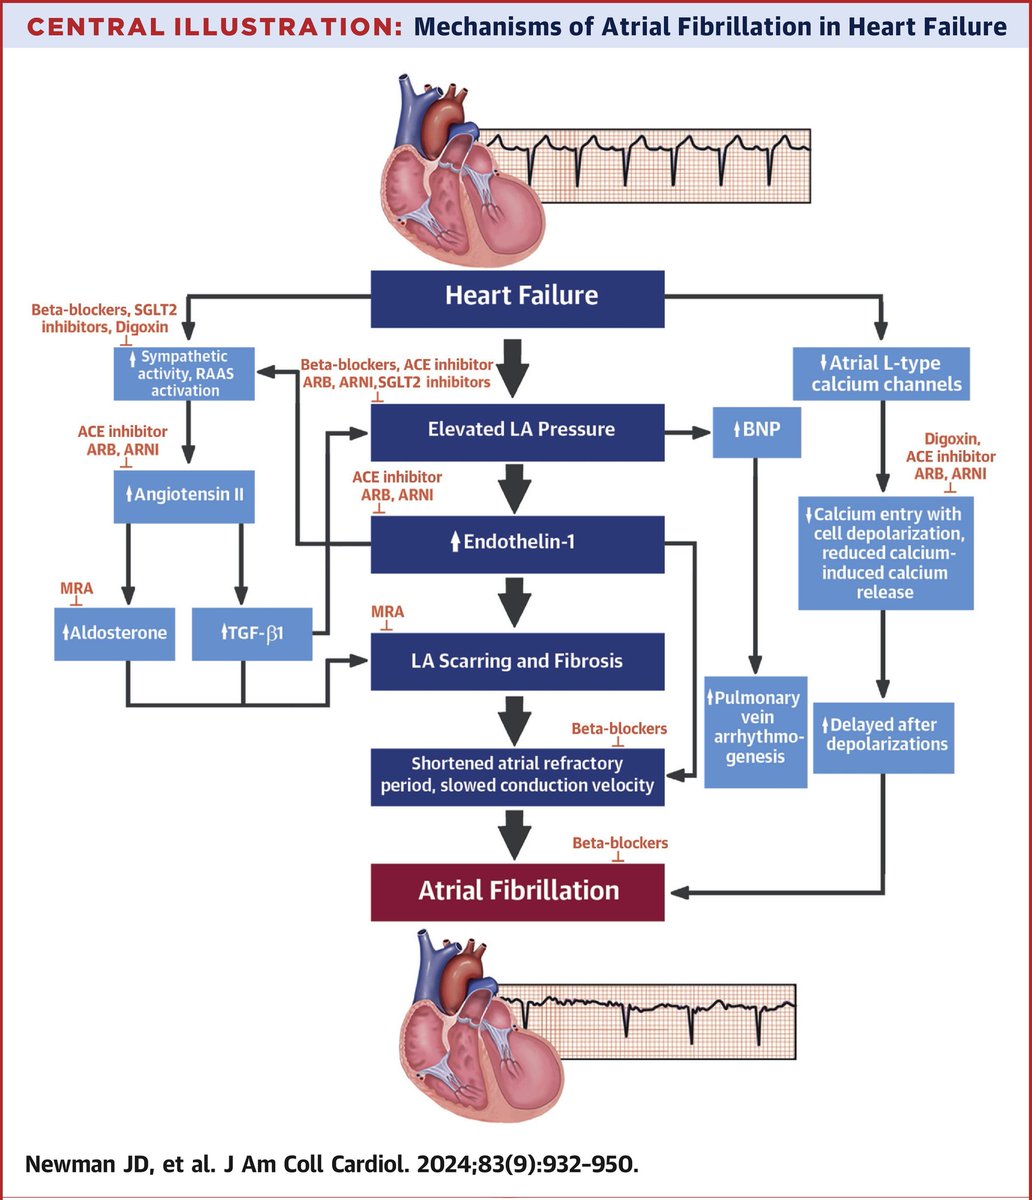 🔴 Implications of Atrial Fibrillation for Guideline-Directed Therapy in Patients With Heart Failure: JACC State-of-the-Art Review jacc.org/doi/10.1016/j.… #Cardiology #CardioTwitter #CardioEd #CardioX #medical #StateOfTheArt #Review #Afib